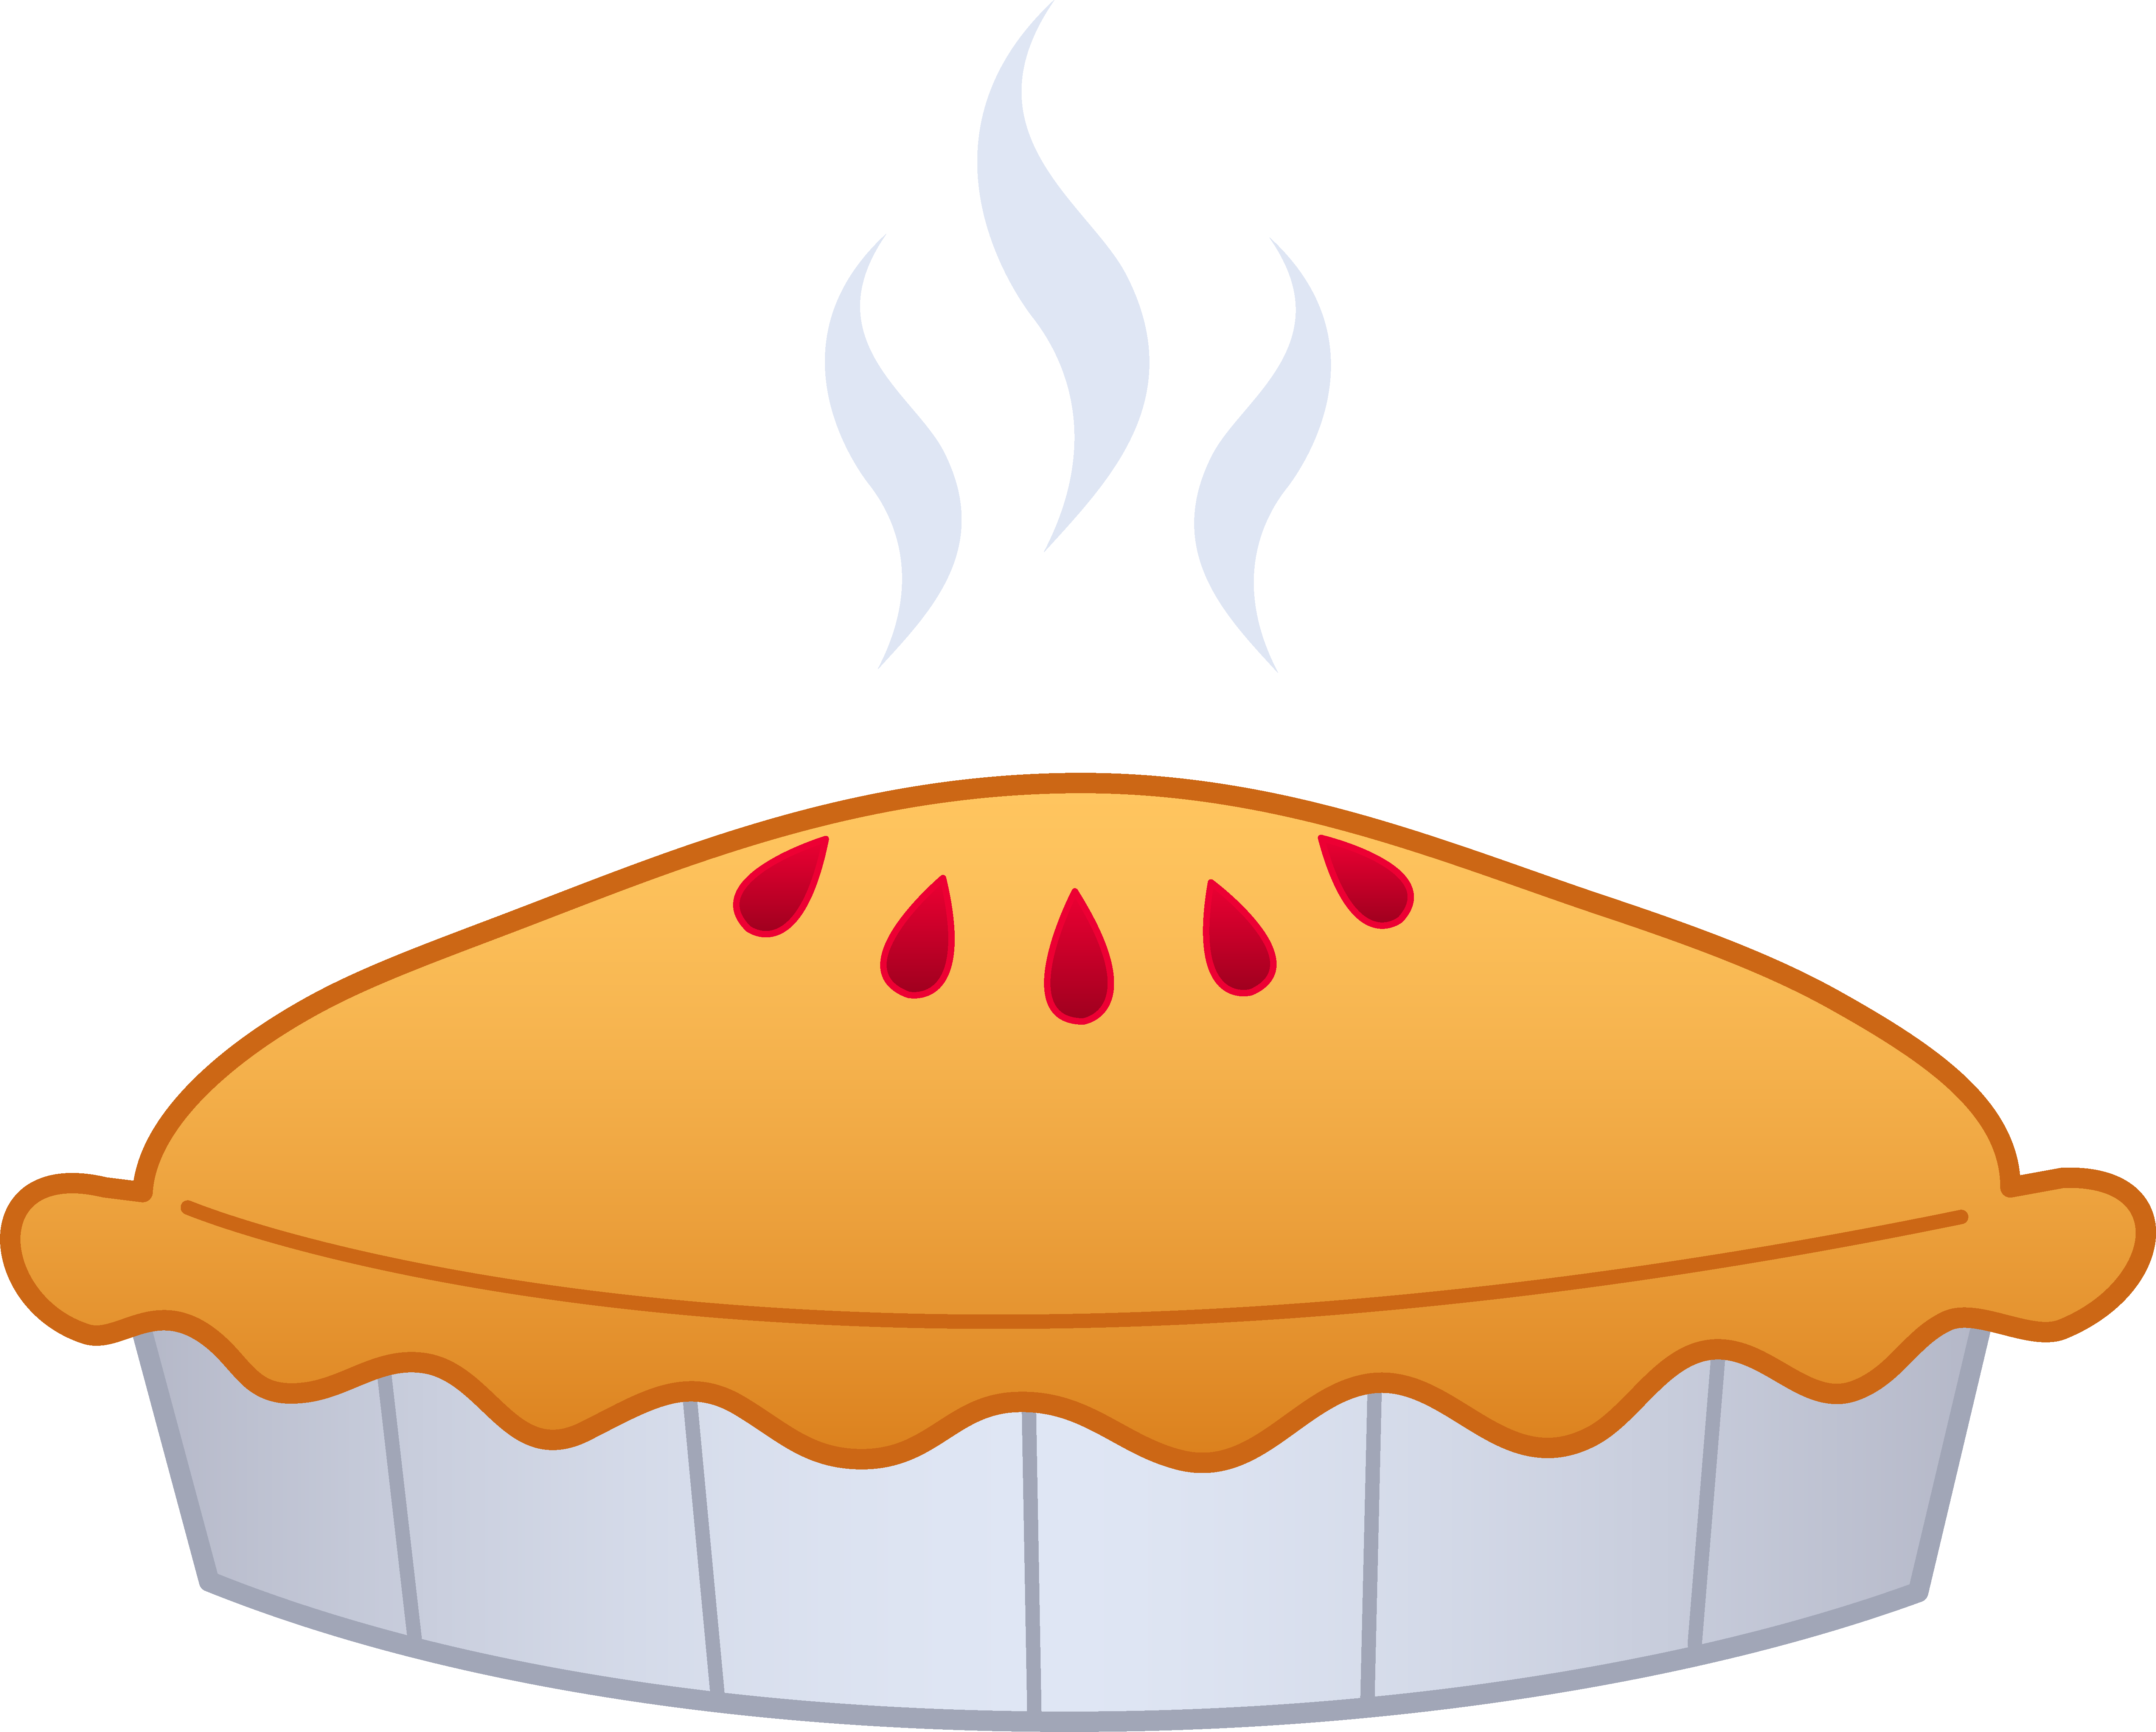 Download PNG image - Pie PNG Image 